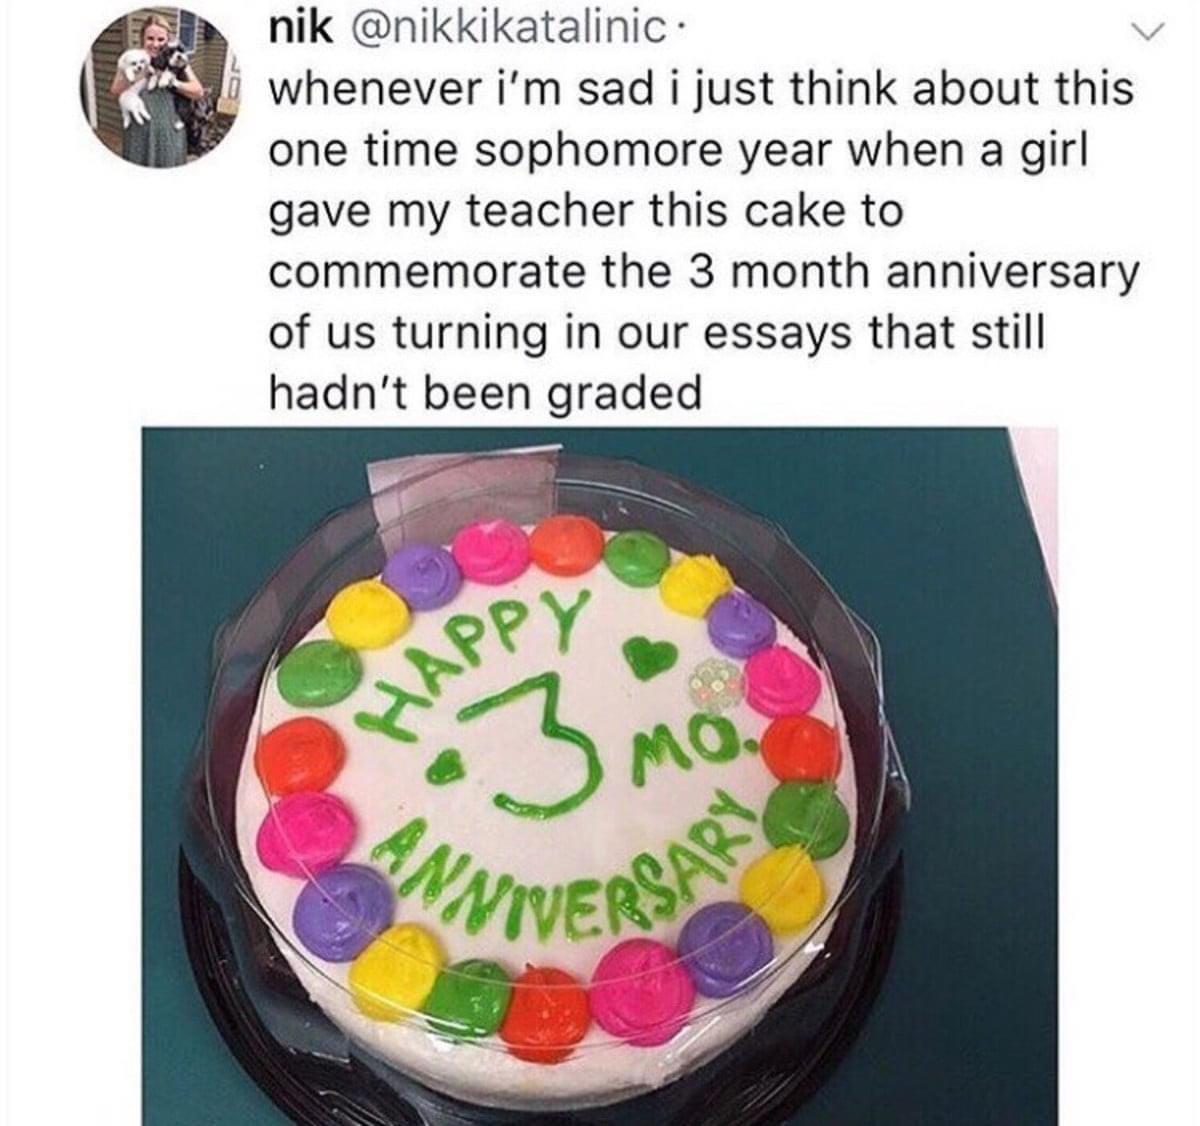 we all had that one teacher, this student just did something about it